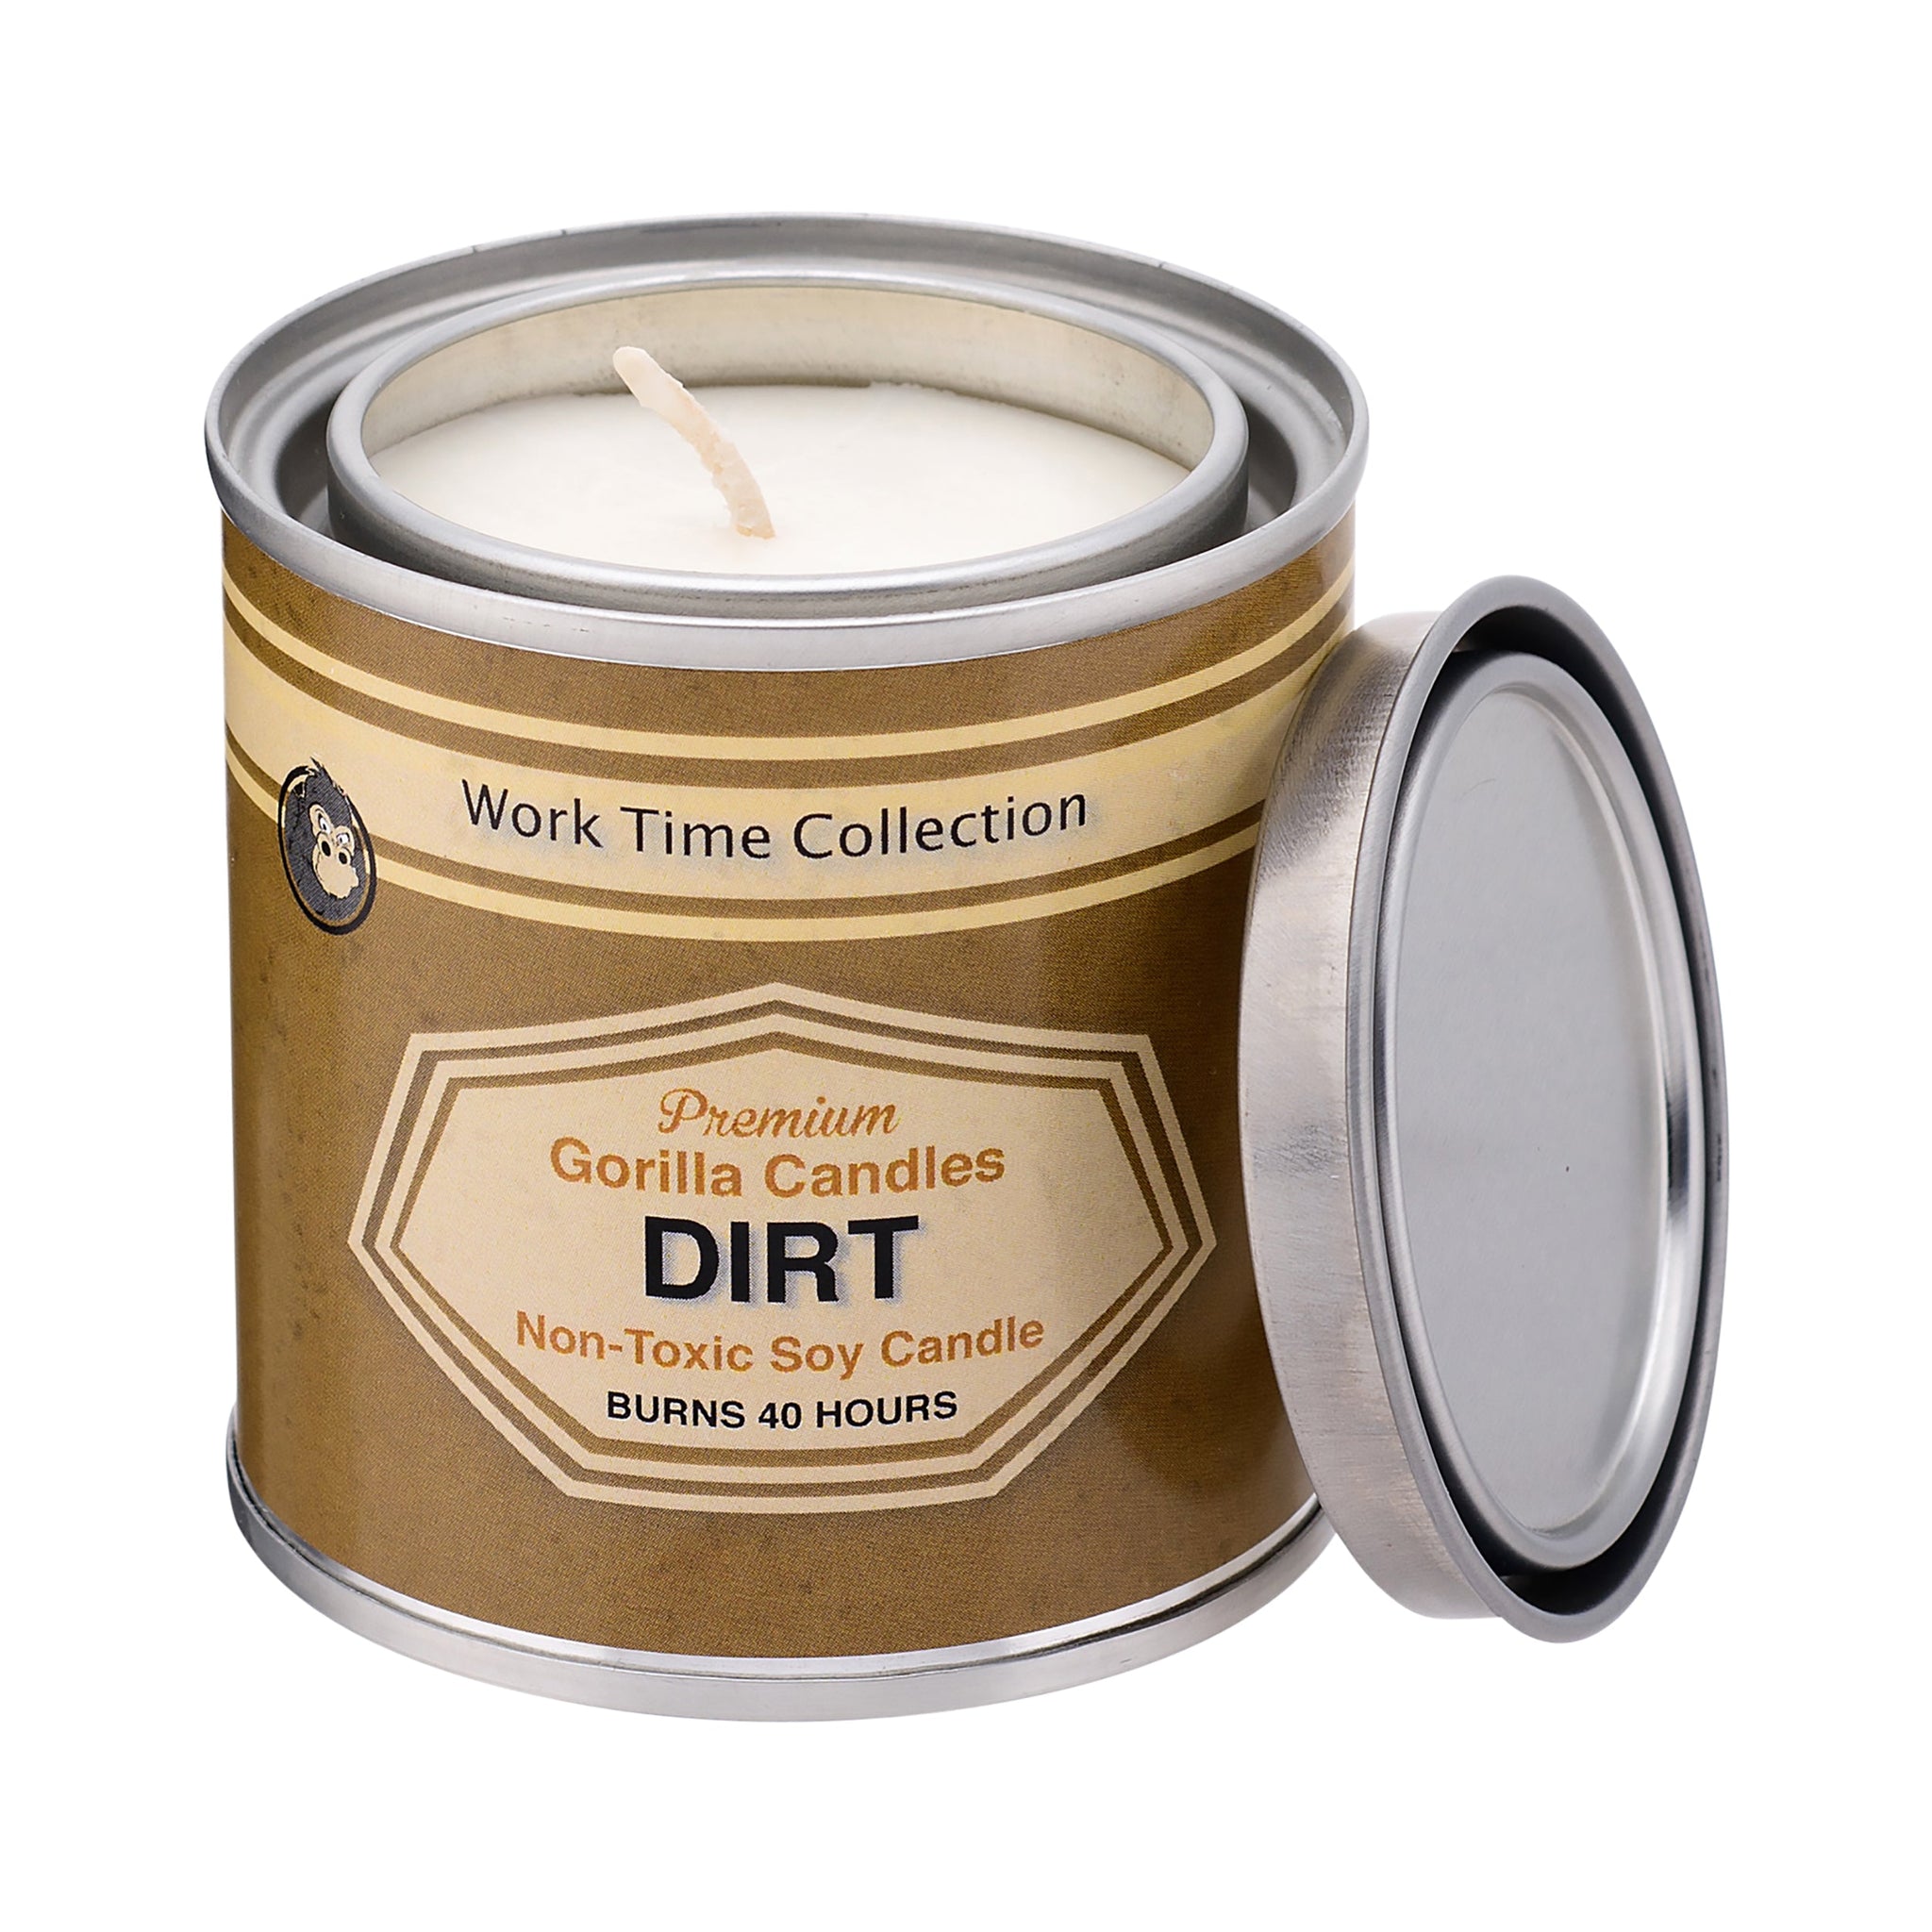 Dirt by Gorilla Candles™